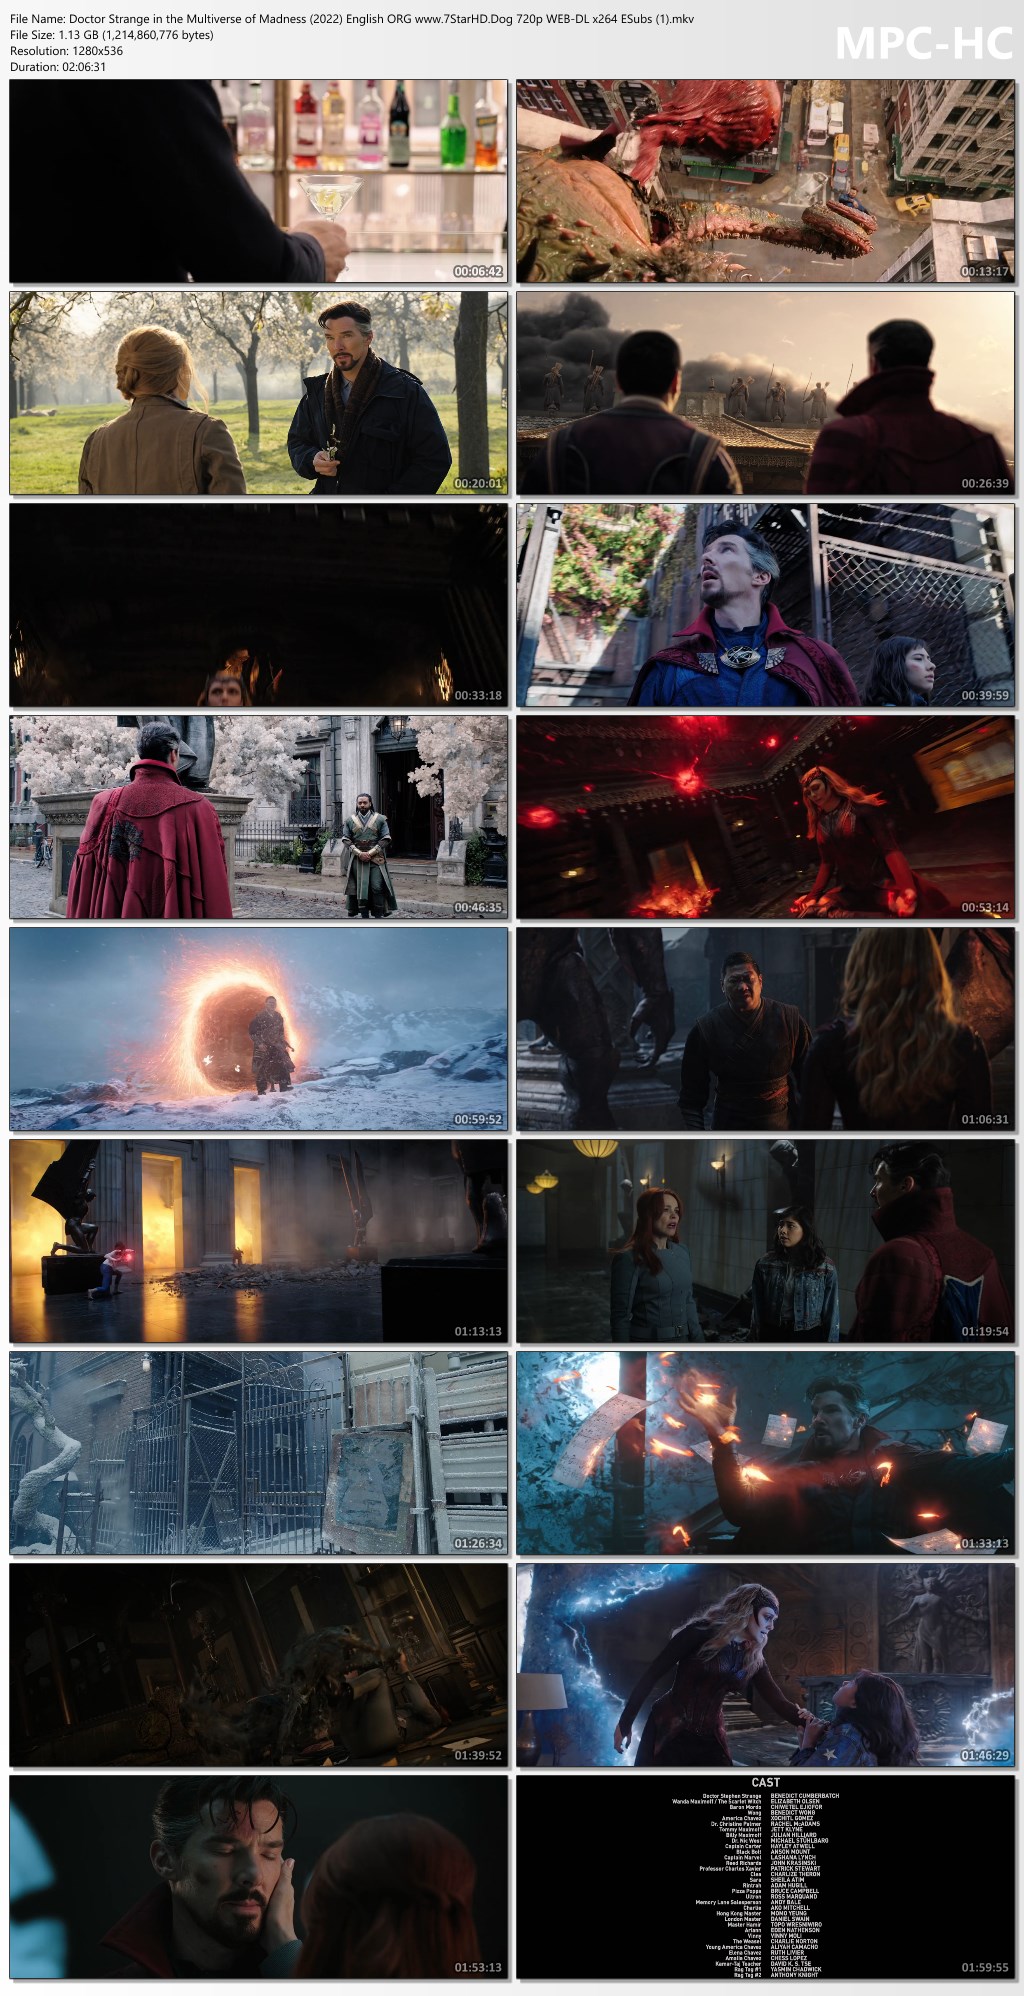 Doctor Strange in the Multiverse of Madness 2022 English ORG 1080p WEB-DL 2.2GB ESubs Download 